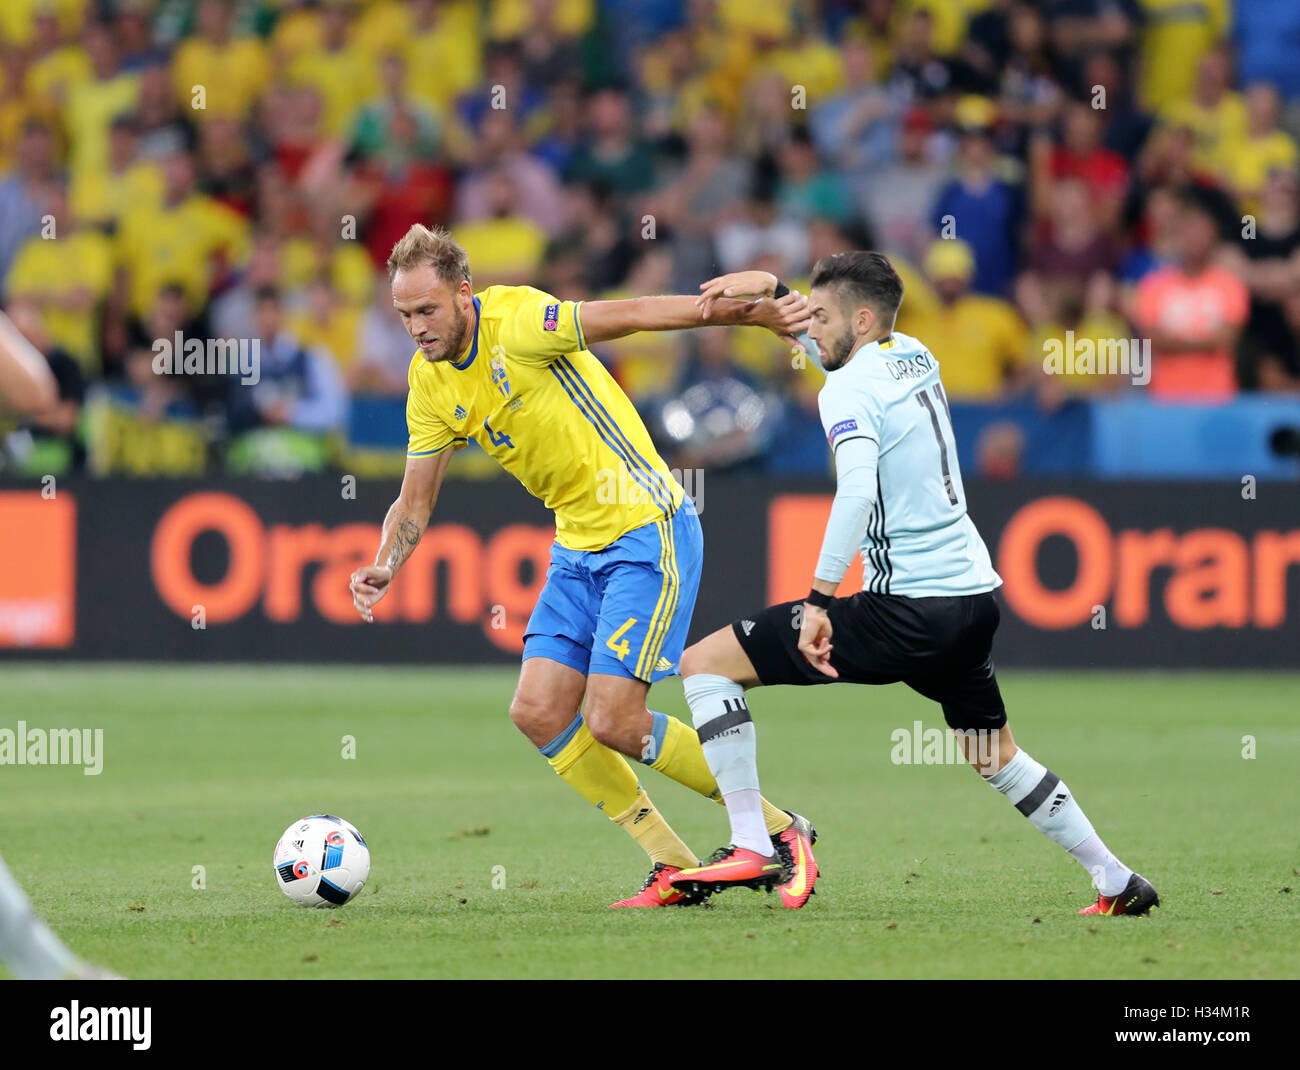 NICE, FRANCE - JUNE 22, 2016: Andreas Granqvist of Sweden (L) fights for a ball with Yannick Carrasco of Belgium during their UEFA EURO 2016 game at Allianz Riviera Stade de Nice, City of Nice, France Stock Photo